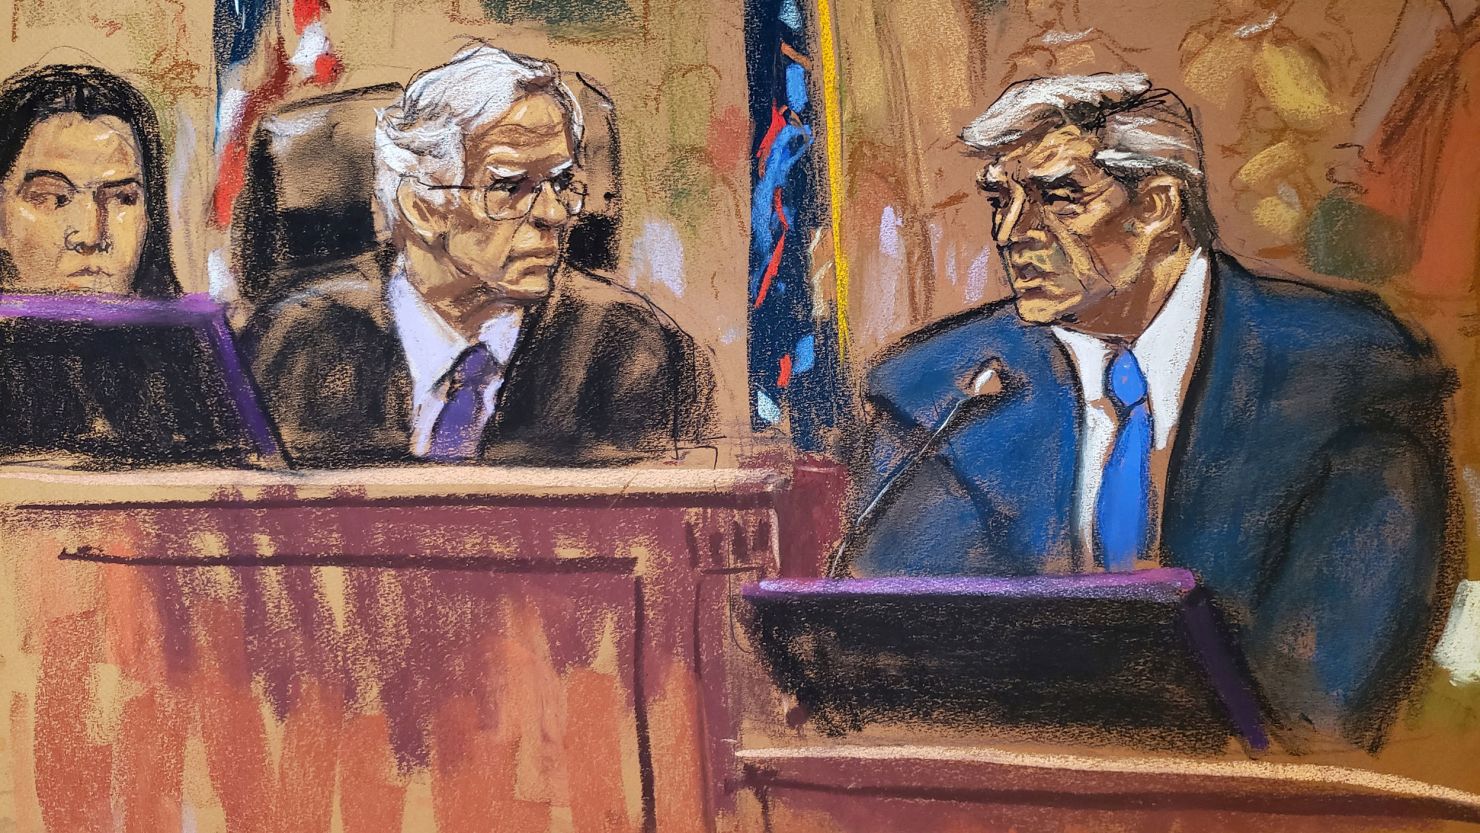 In this courtroom sketch, former President Donald Trump is questioned by Judge Arthur F. Engoron during the Trump Organization civil fraud trial in New York State Supreme Court on October 25, 2023.